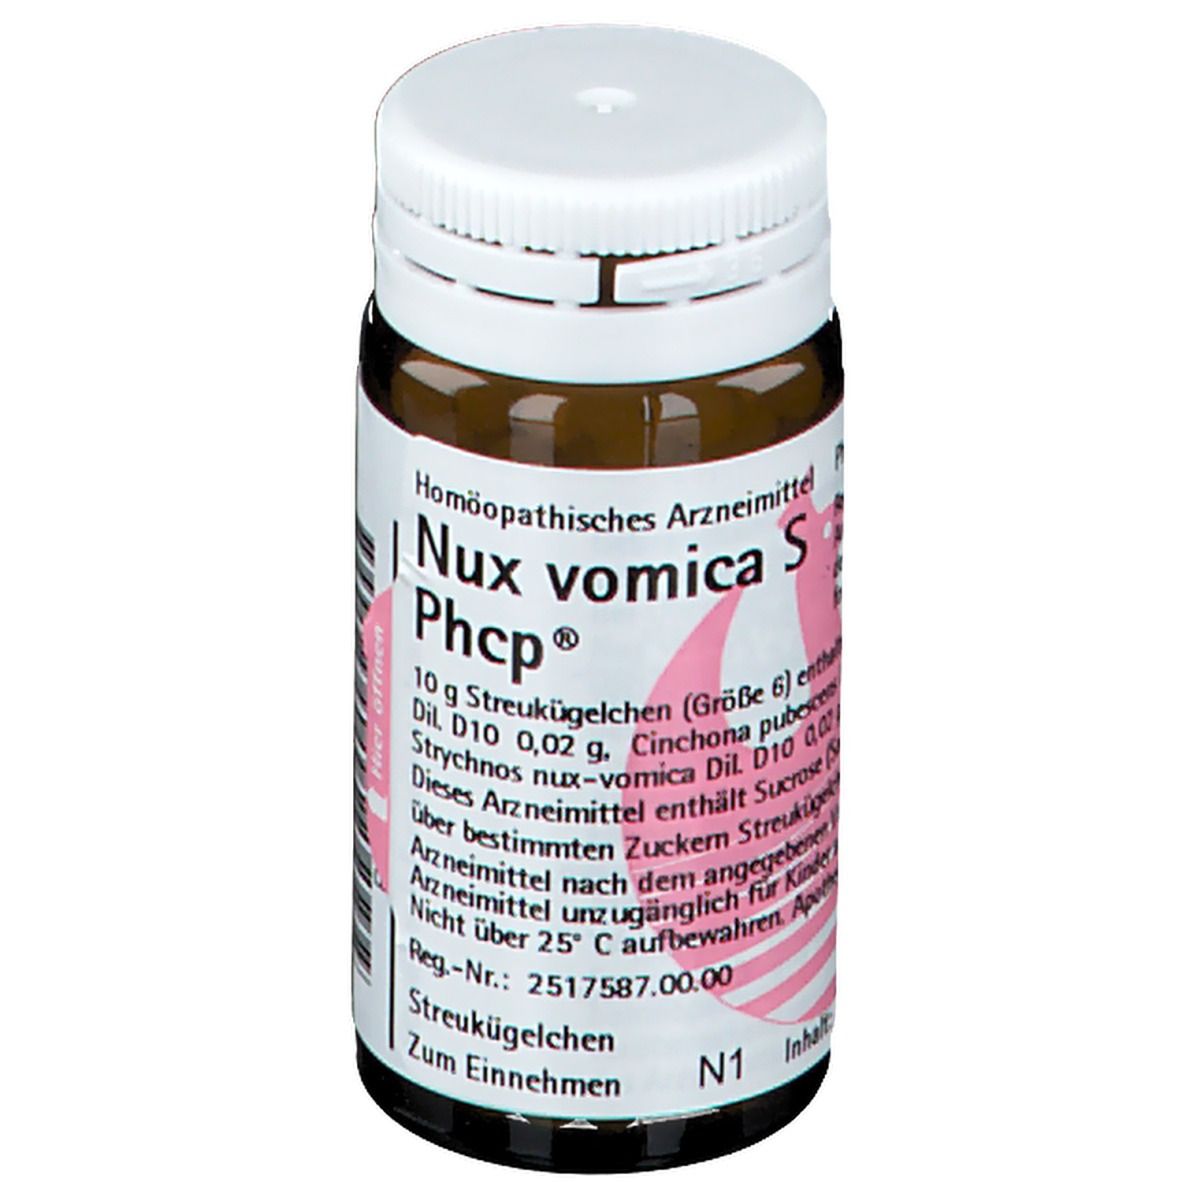 Nux vomica S Phcp®